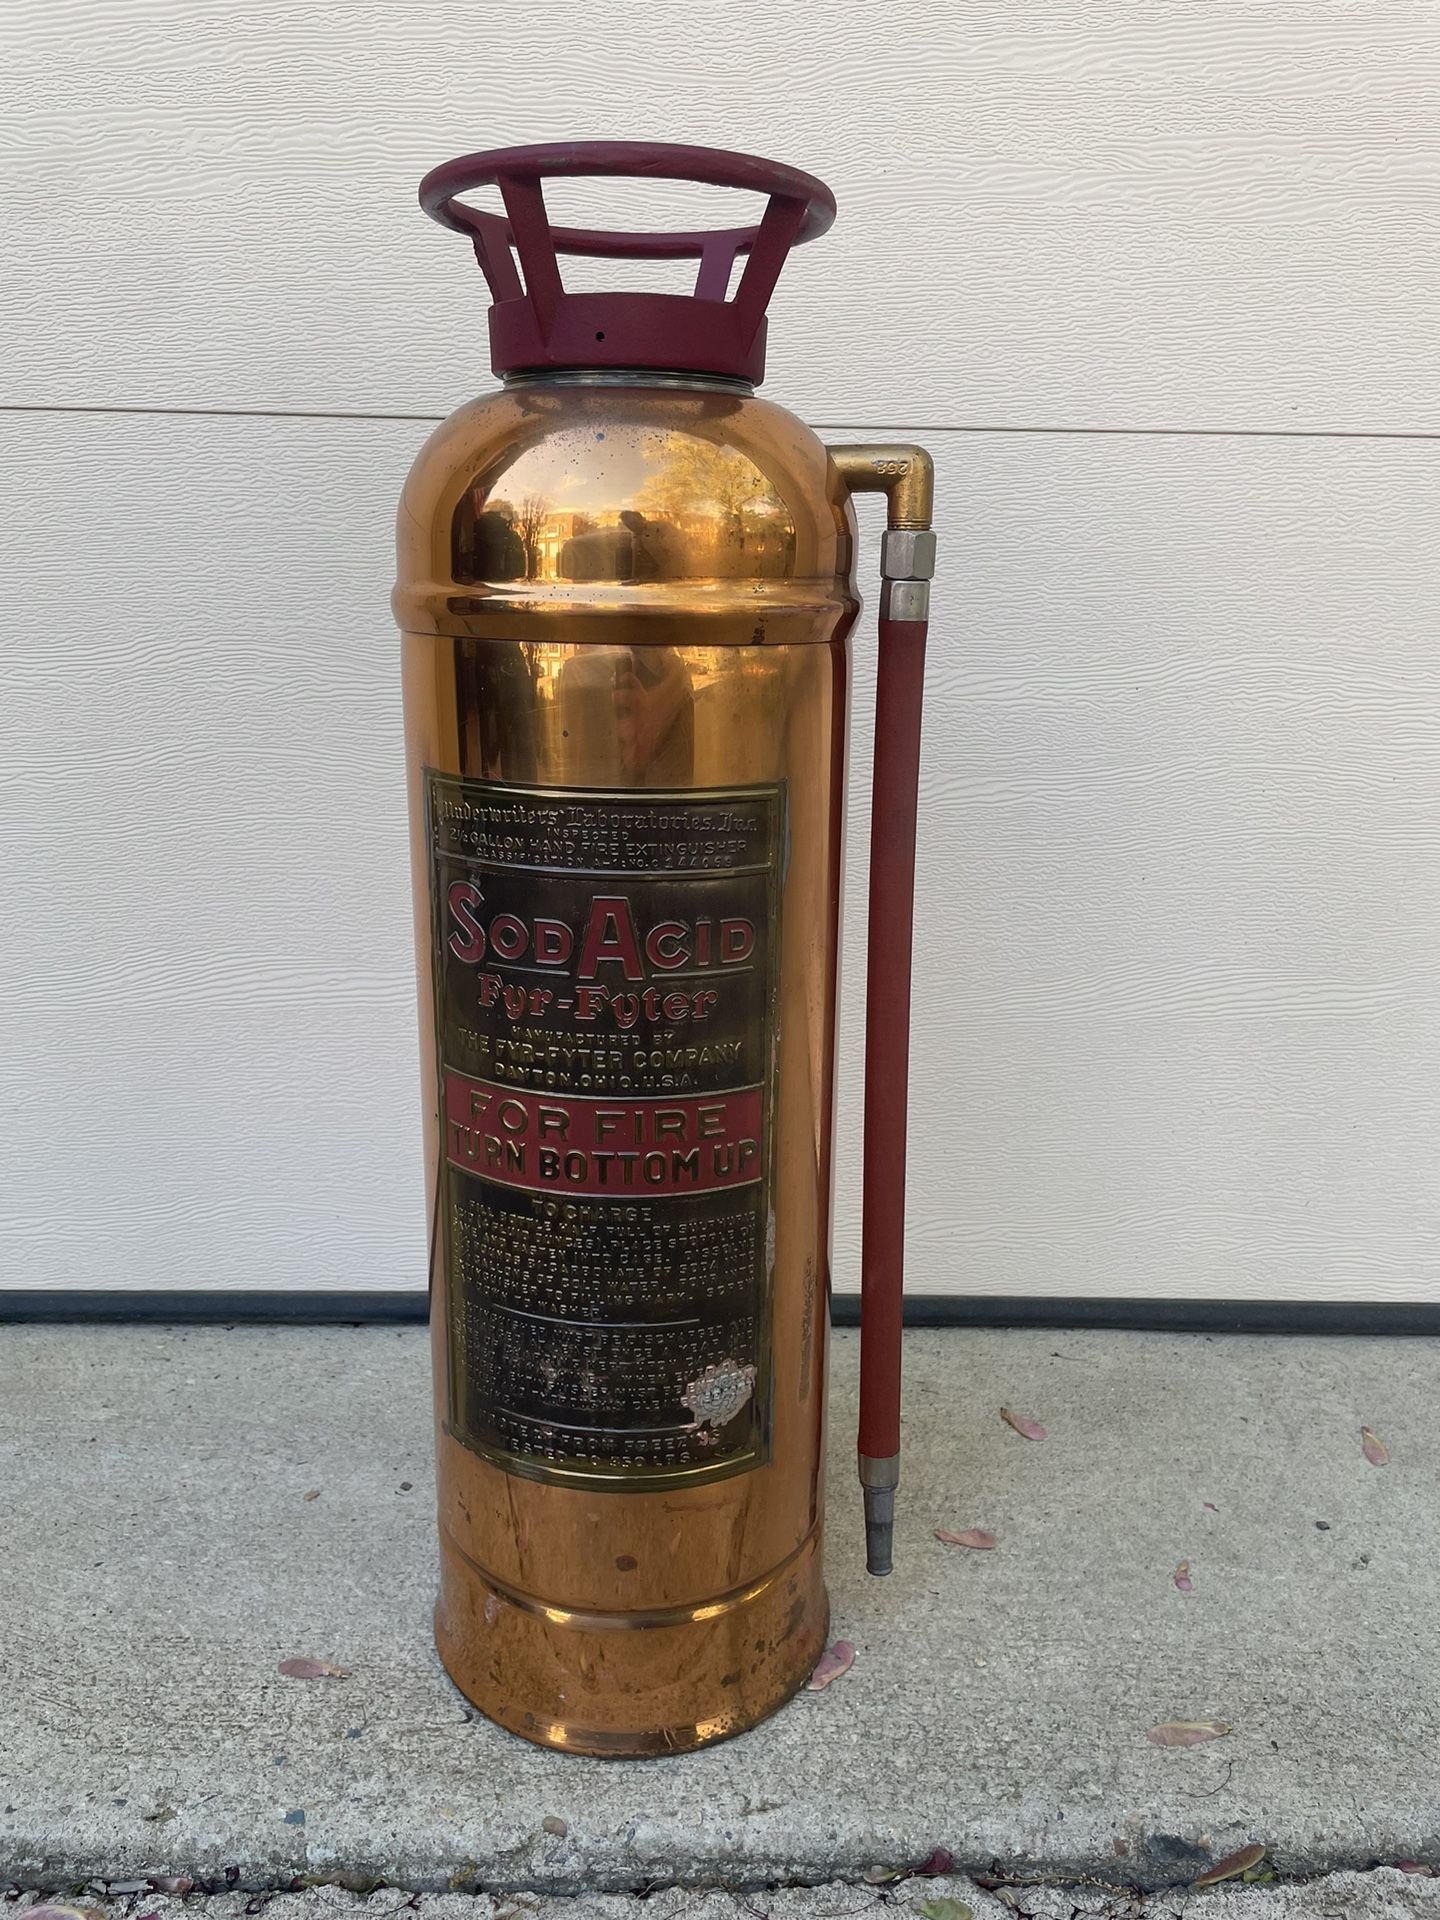 Antique Copper and Brass Fire Extinguisher